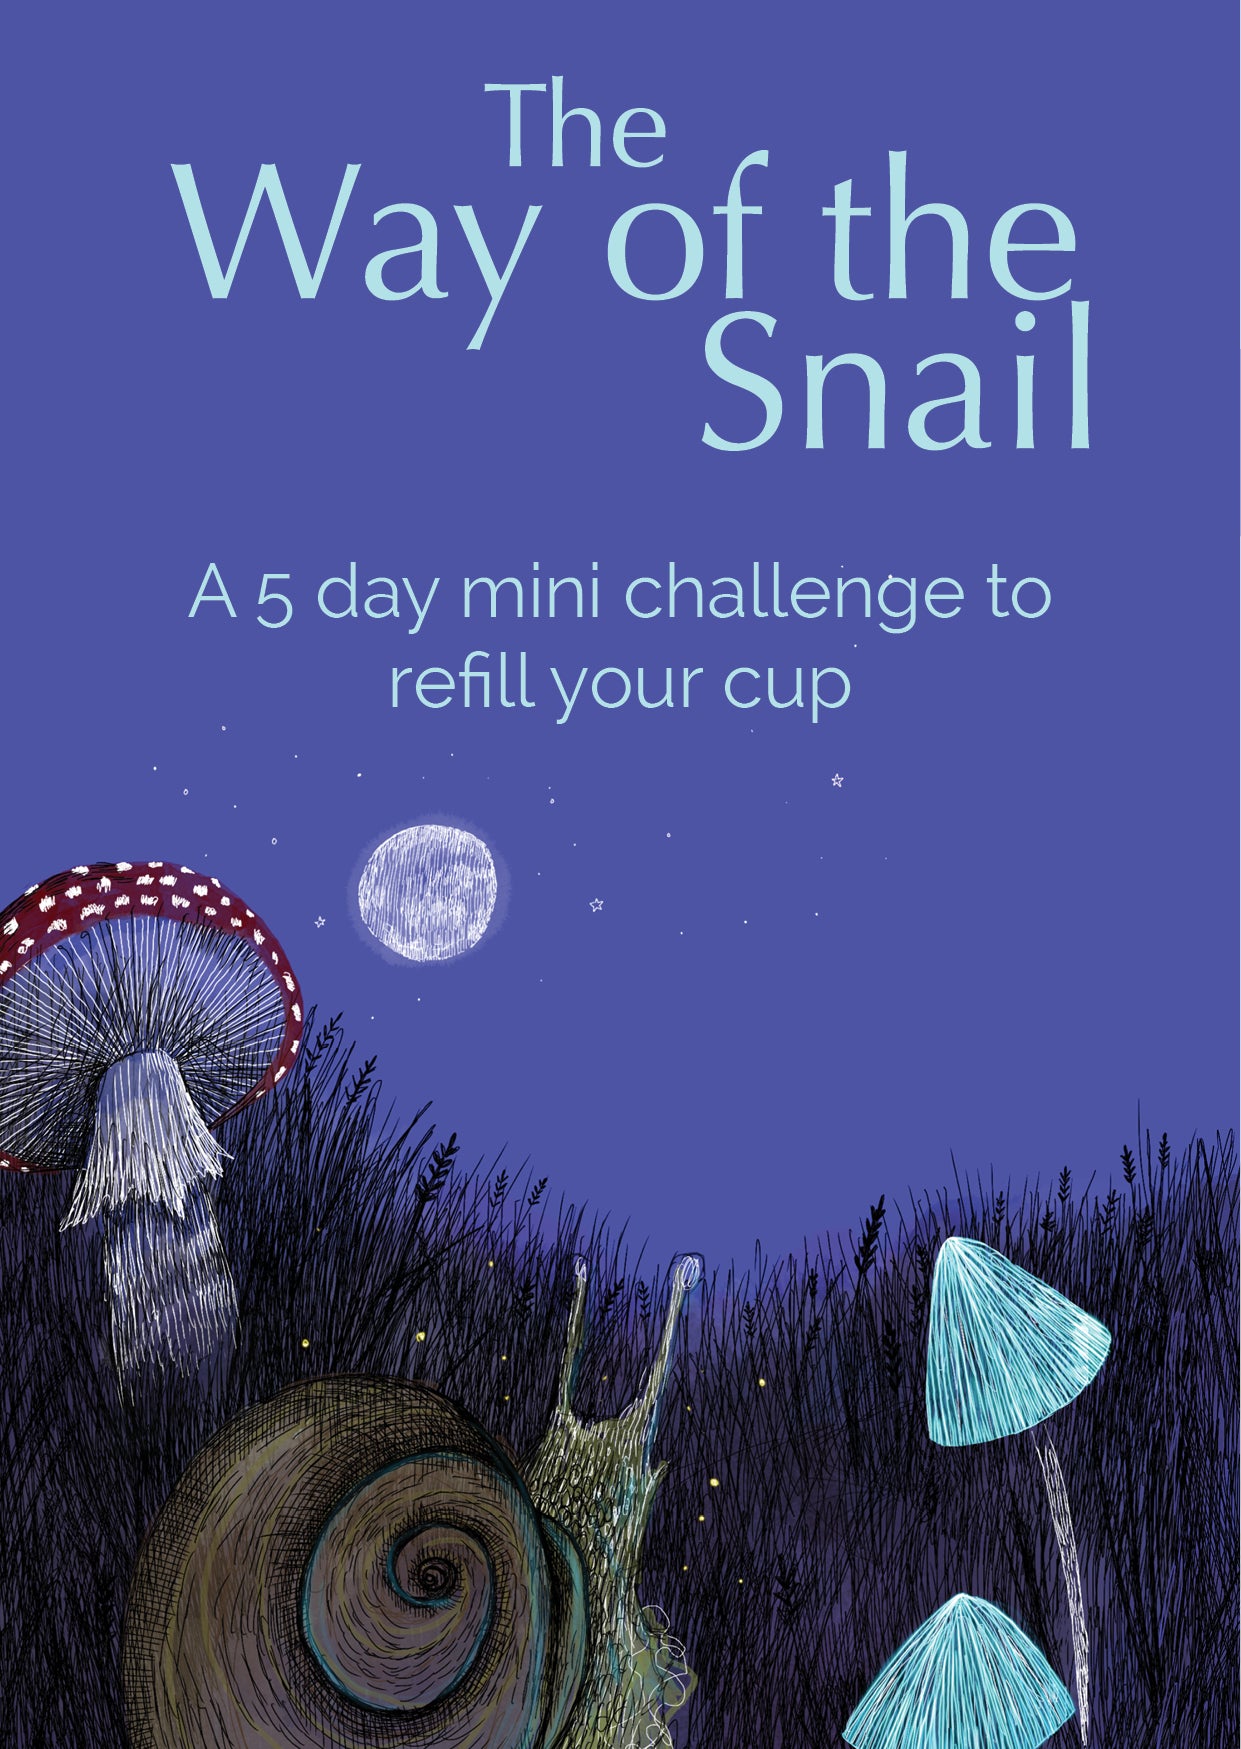 The Way of the Snail: 5 day challenge to refill your cup